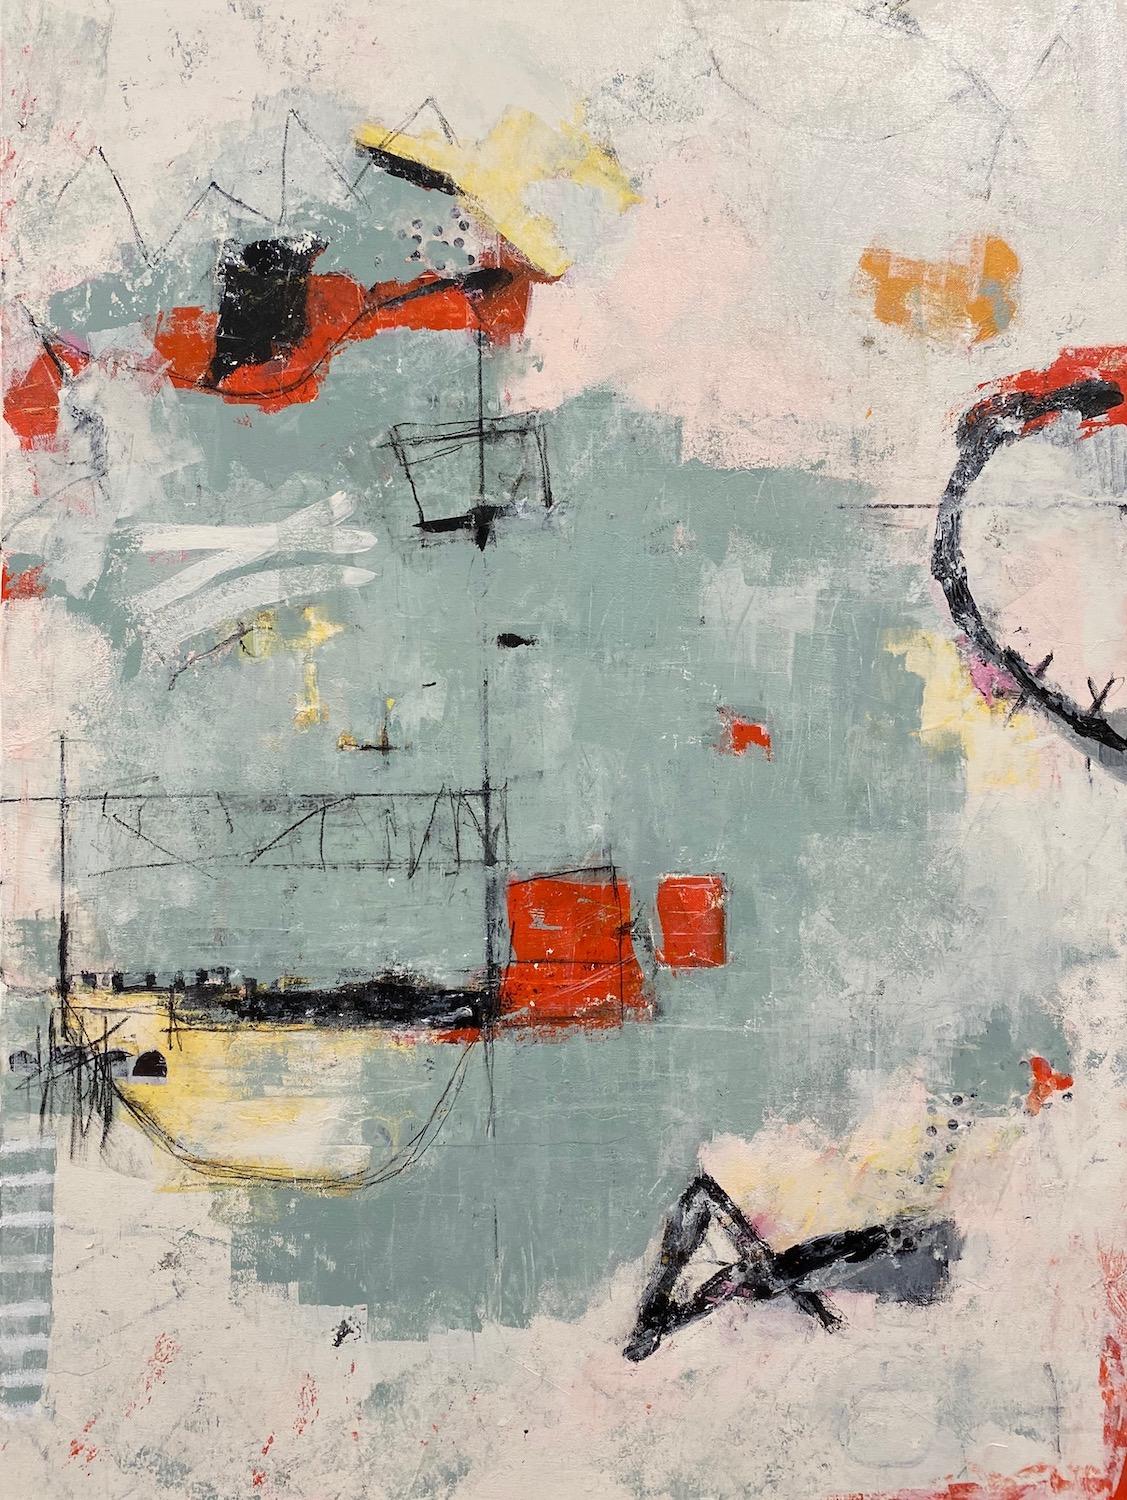 <p>Artist Comments<br />Minimal, modernist composition with bold pops of color and mark making throughout. Shellie says the painting is reflective of the quick movements and characteristics of a bird. "Sensitive scratchings, odd trinkets for nesting